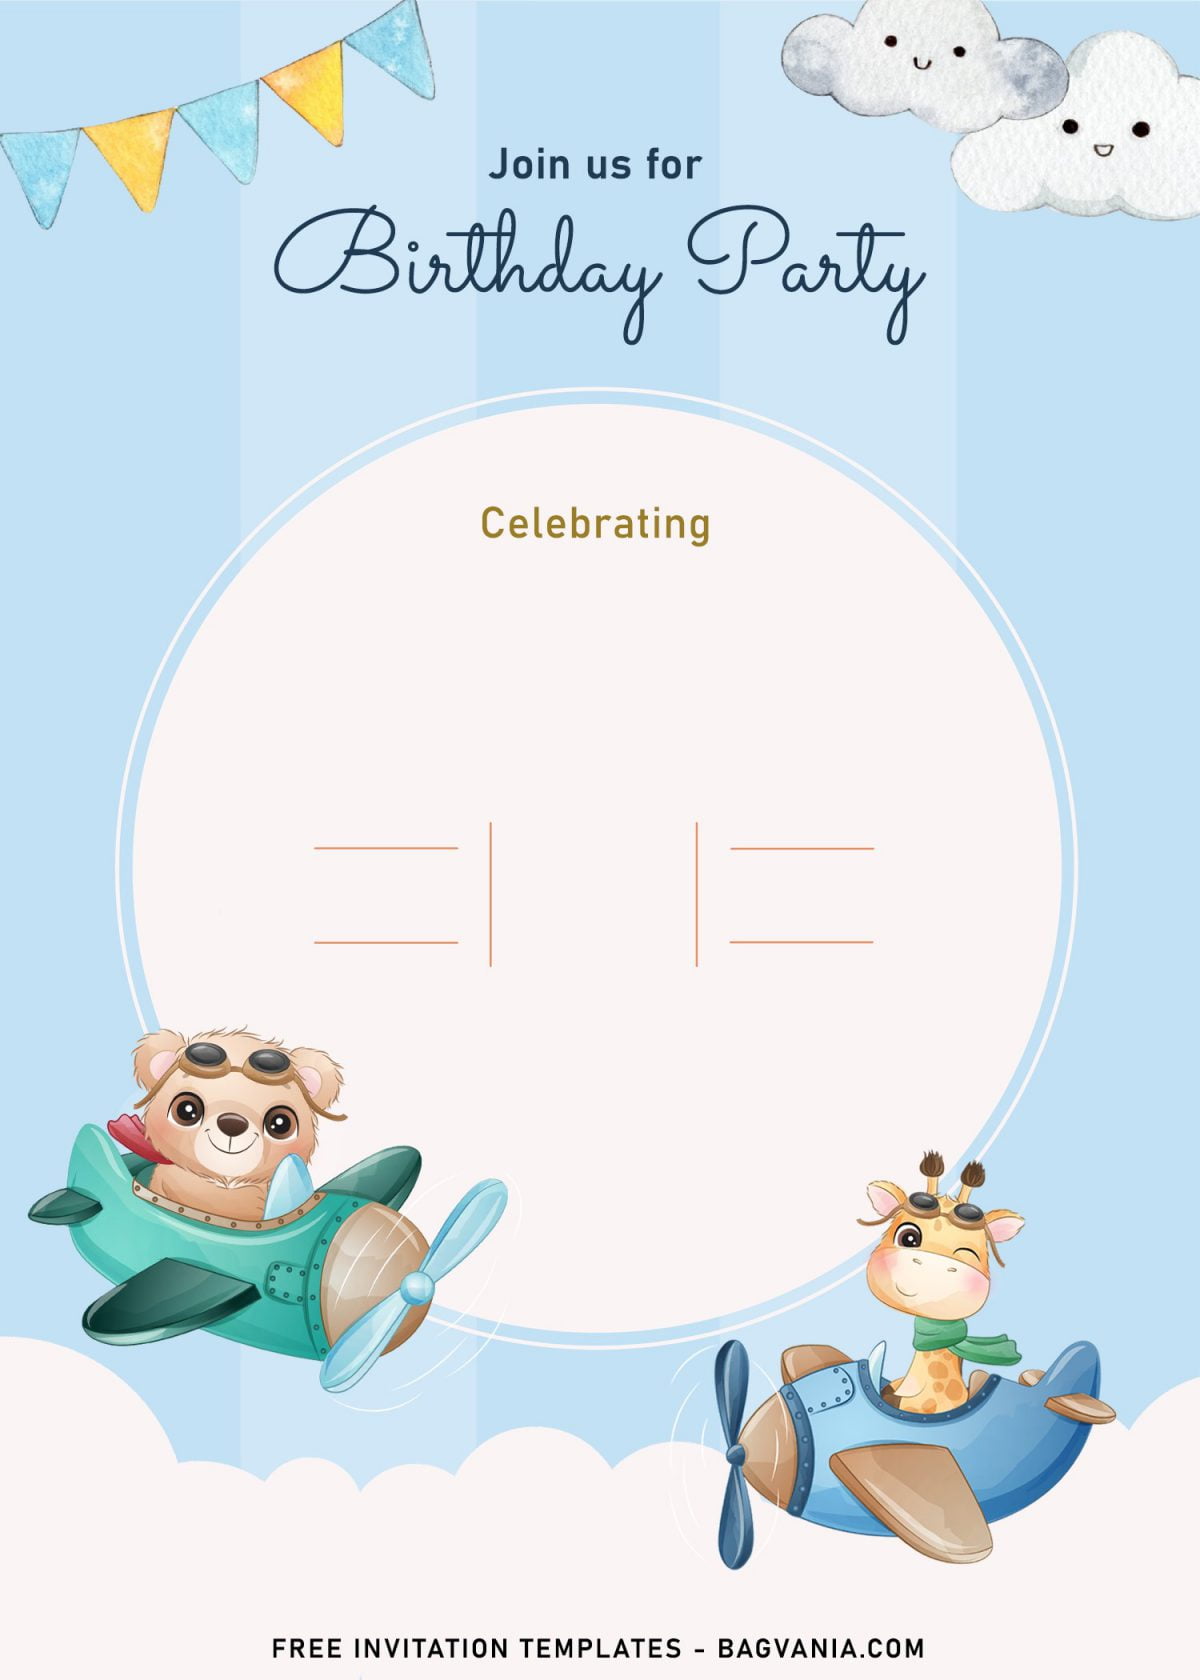 9+ Cute Hand Drawn Up In The Sky Birthday Invitation Templates and has cute baby panda